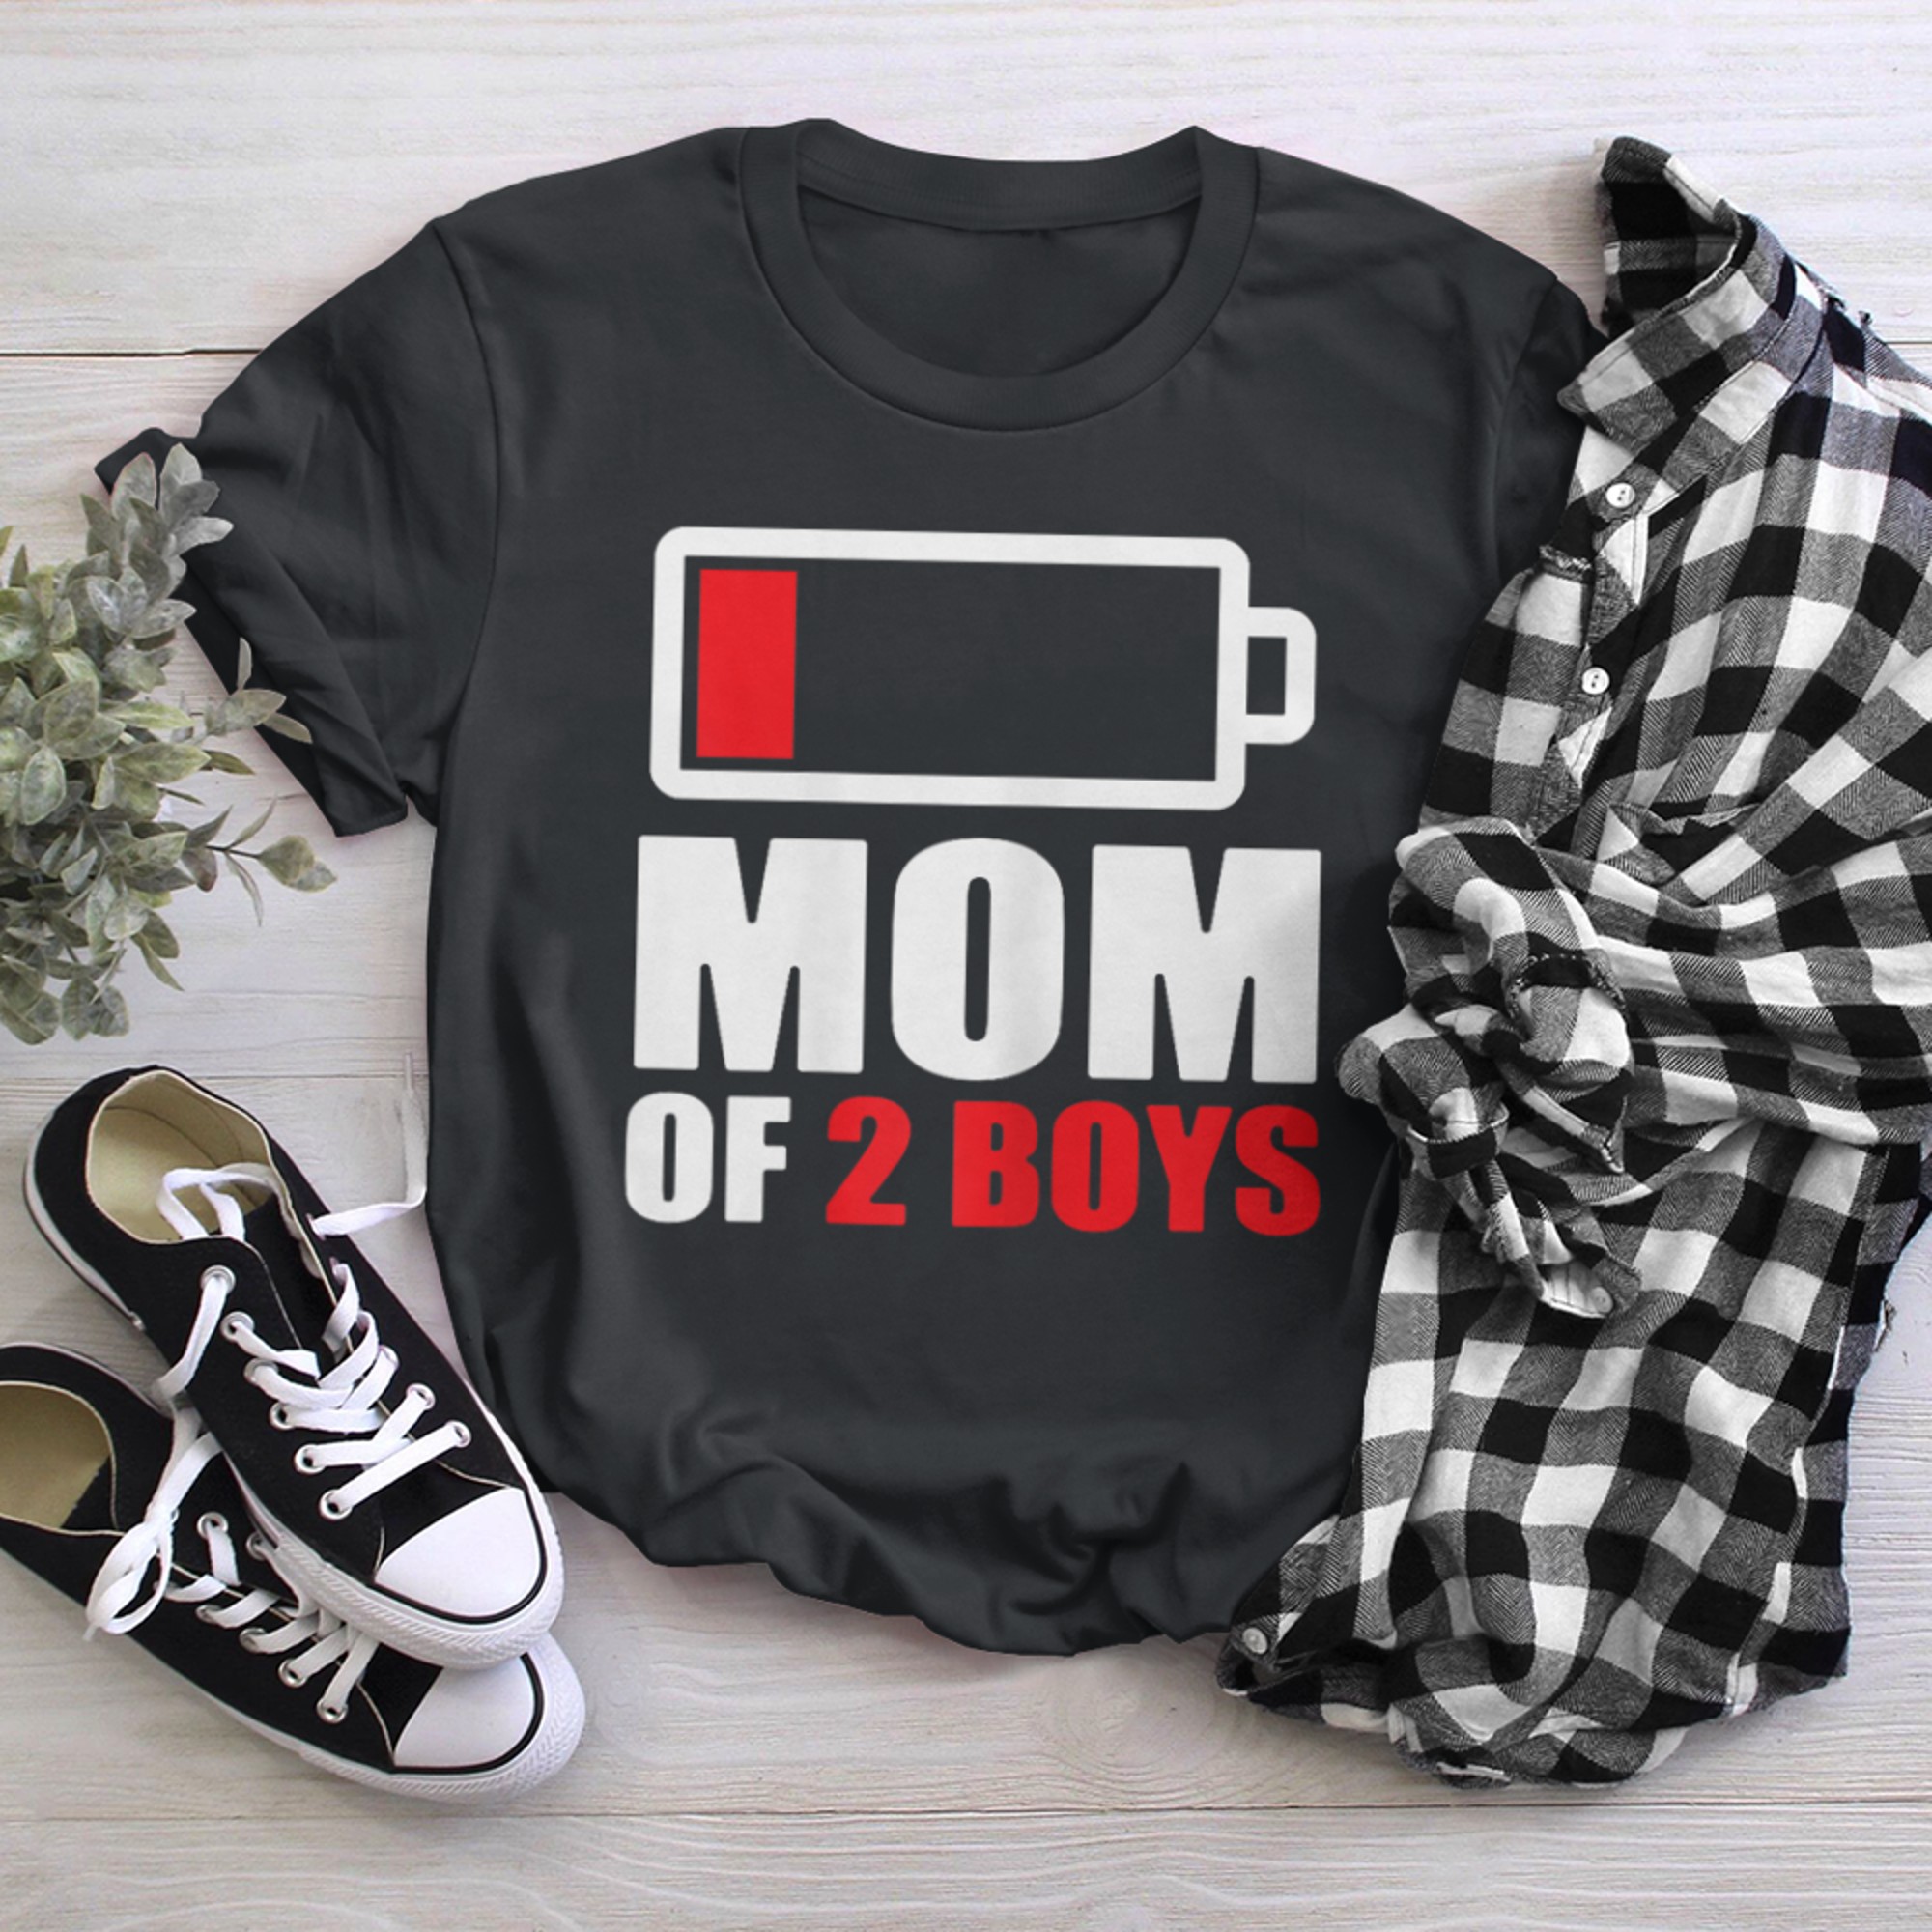 Mom of Funny Parent Battery Low t-shirt black